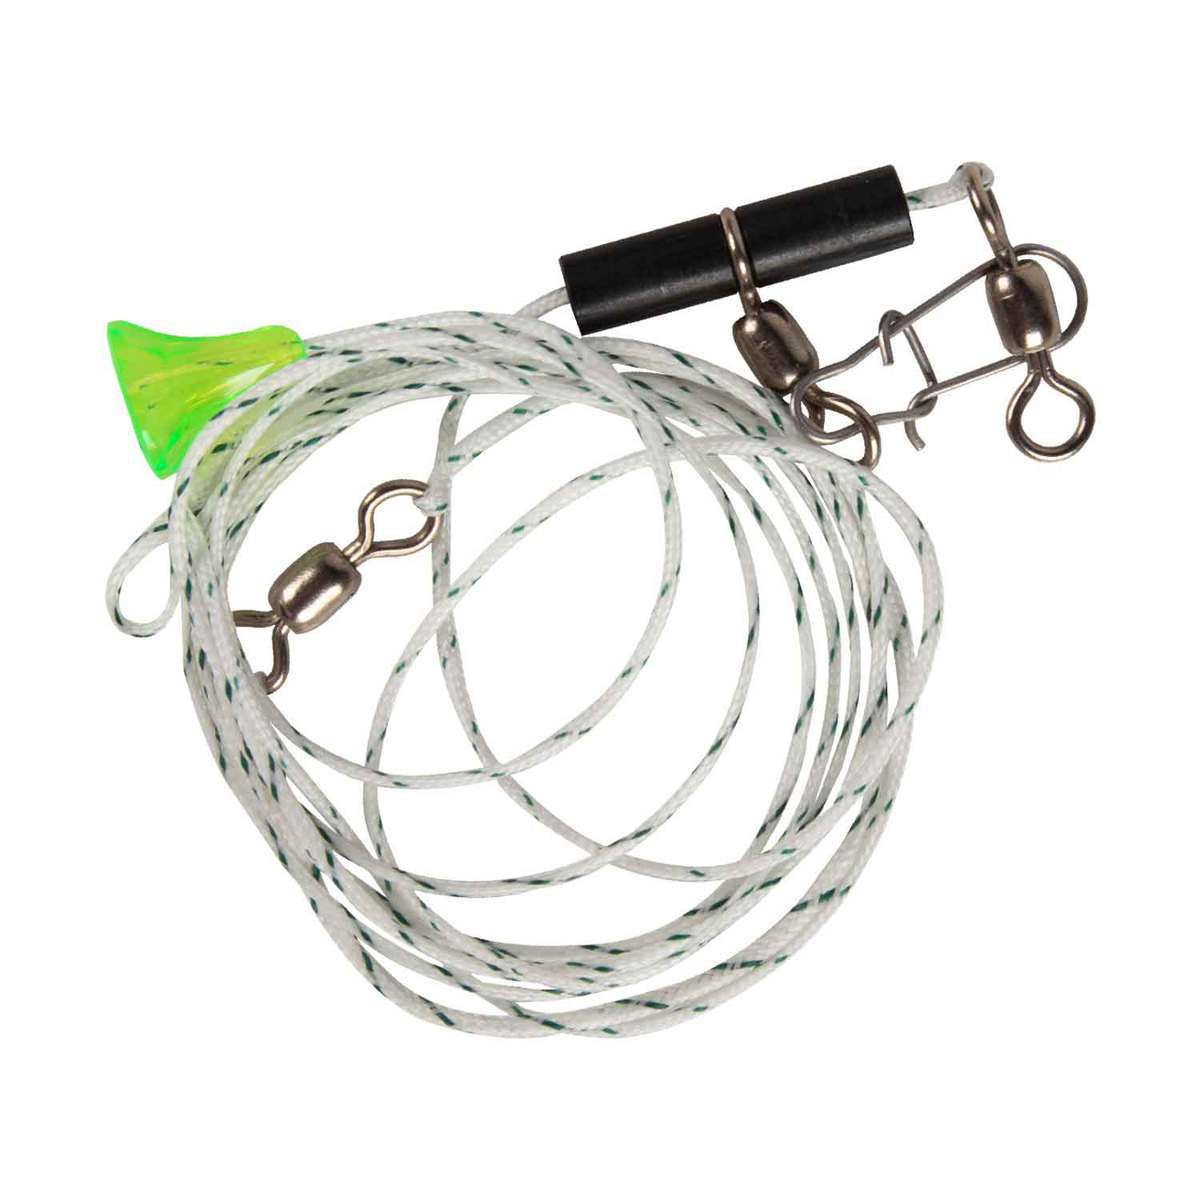 Hays Fishing Equipment Knot-Less Leader by Sportsman's Warehouse